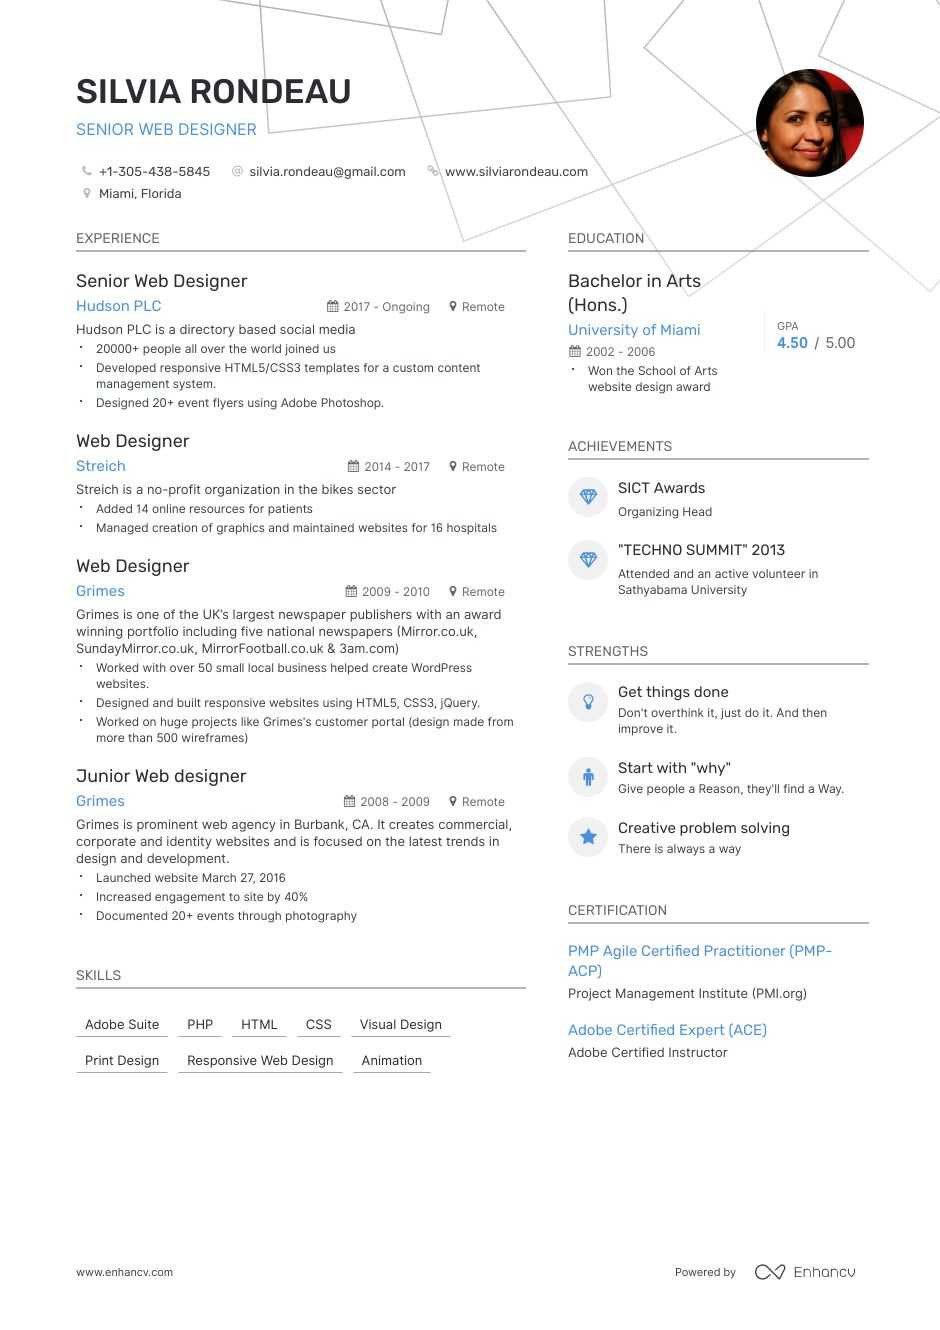 Web Designer Resume Sample for 1 Year Experience the Best Web Designer Resume Examples & Skills to Get You Hired